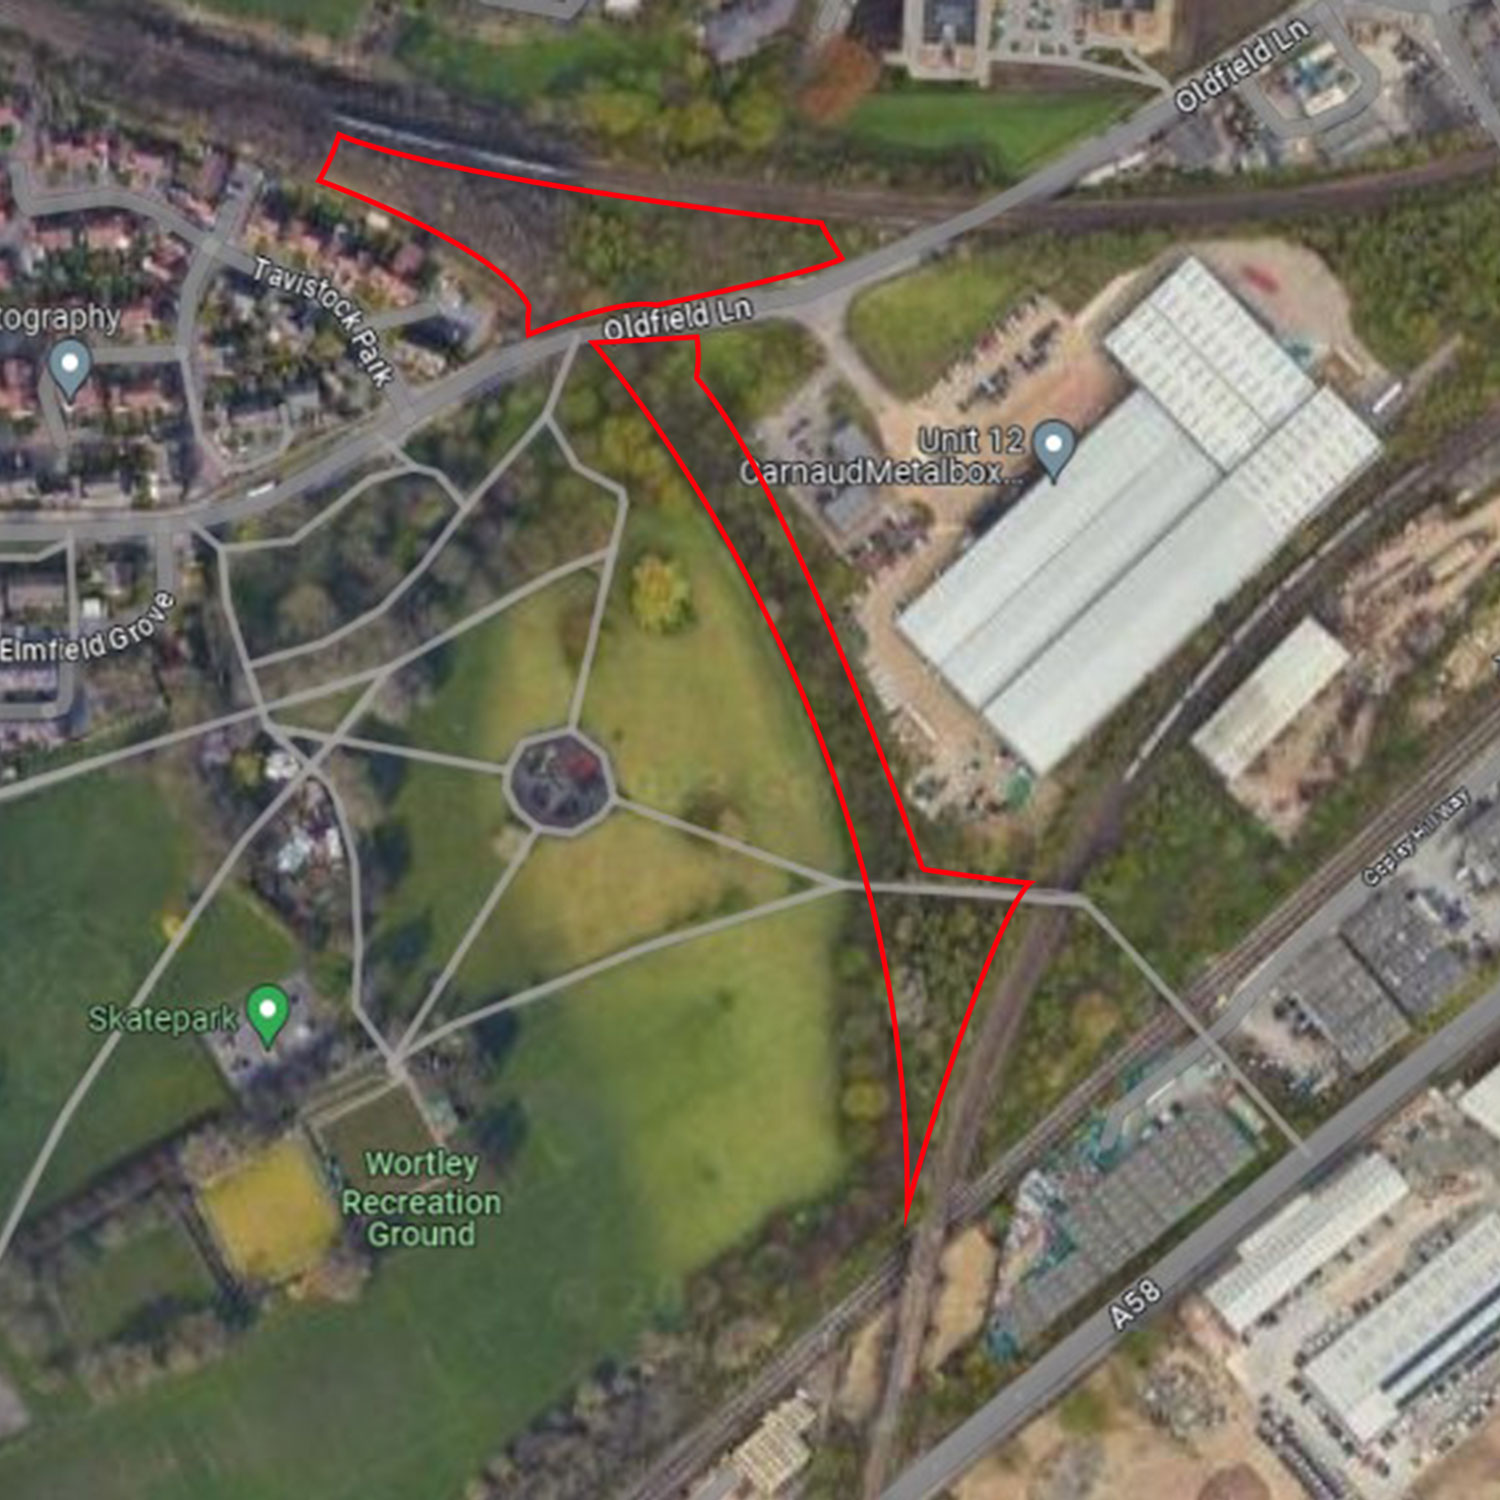 the stretch of old railway track is for sale for £15,000 (Highlighted in red).